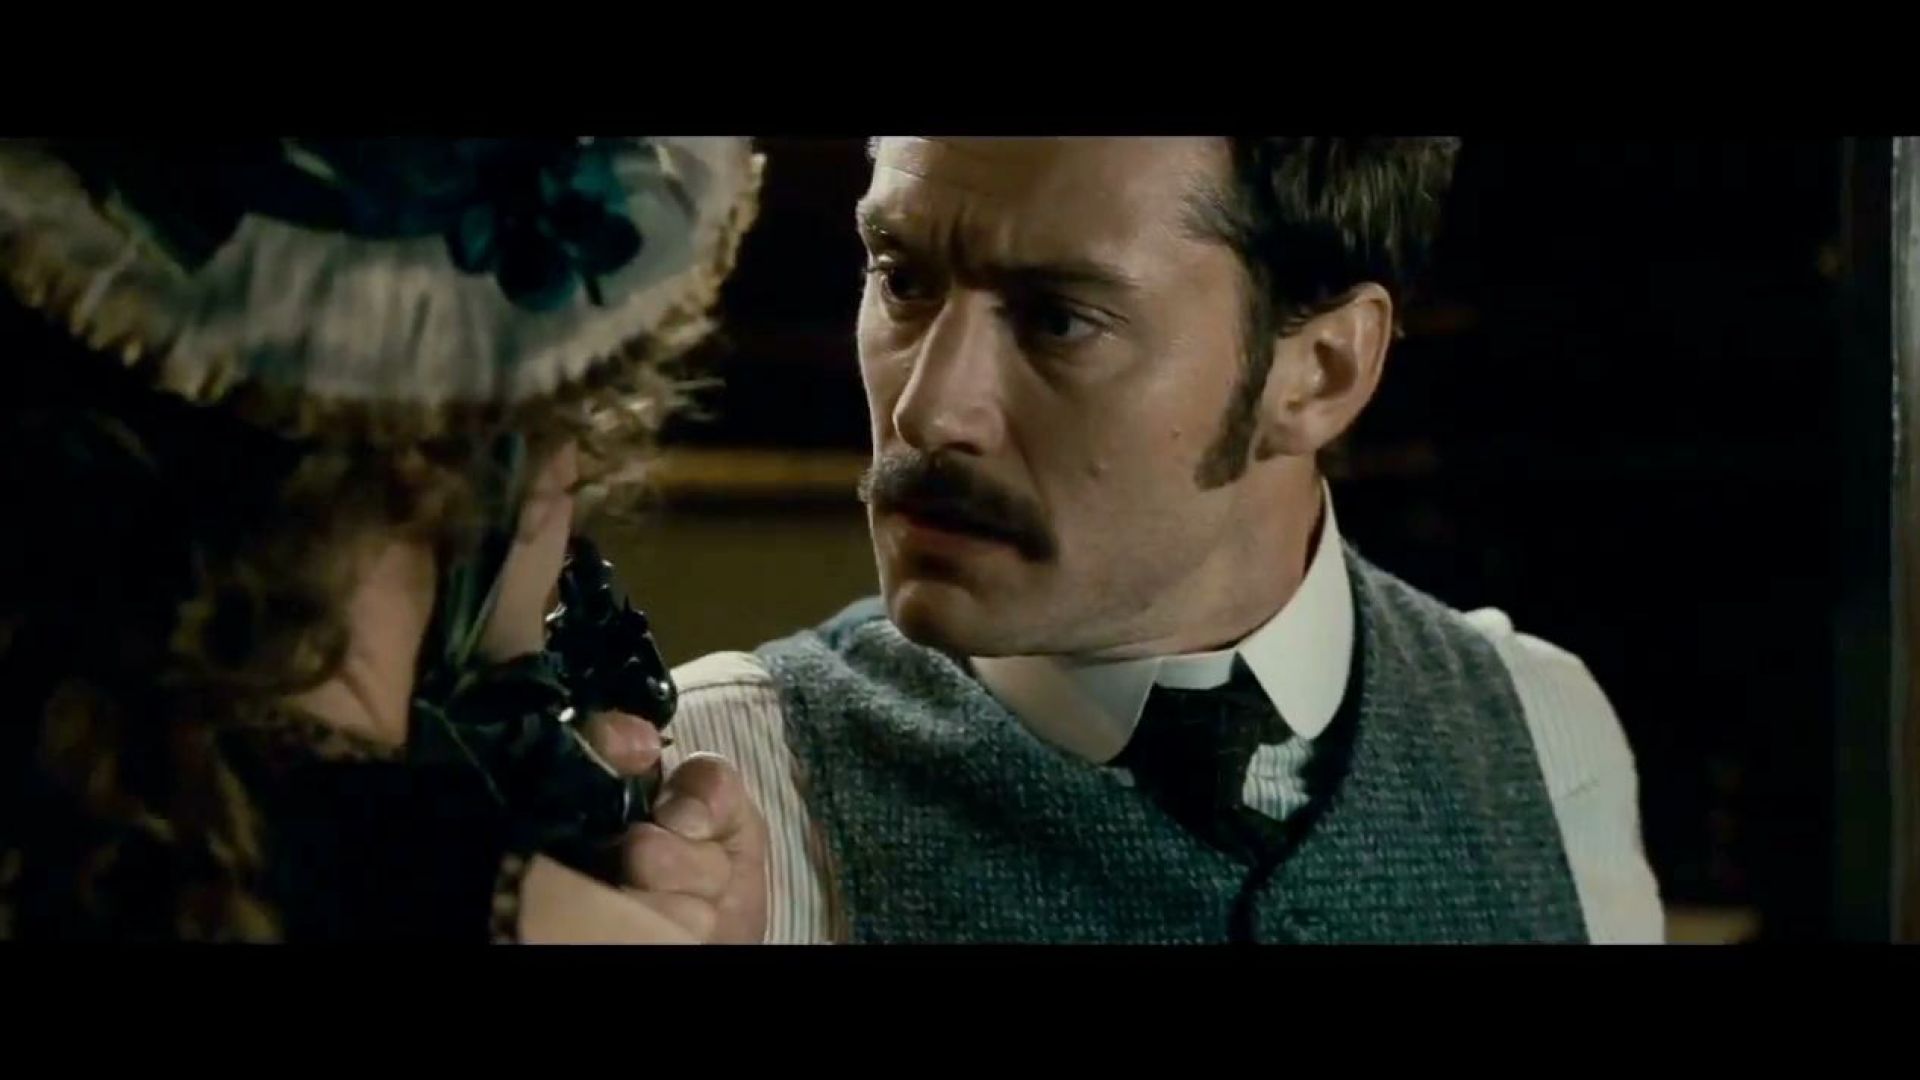 Robert Downey Jr. turns up in a dress in Sherlock Holmes: A Game of Shadows